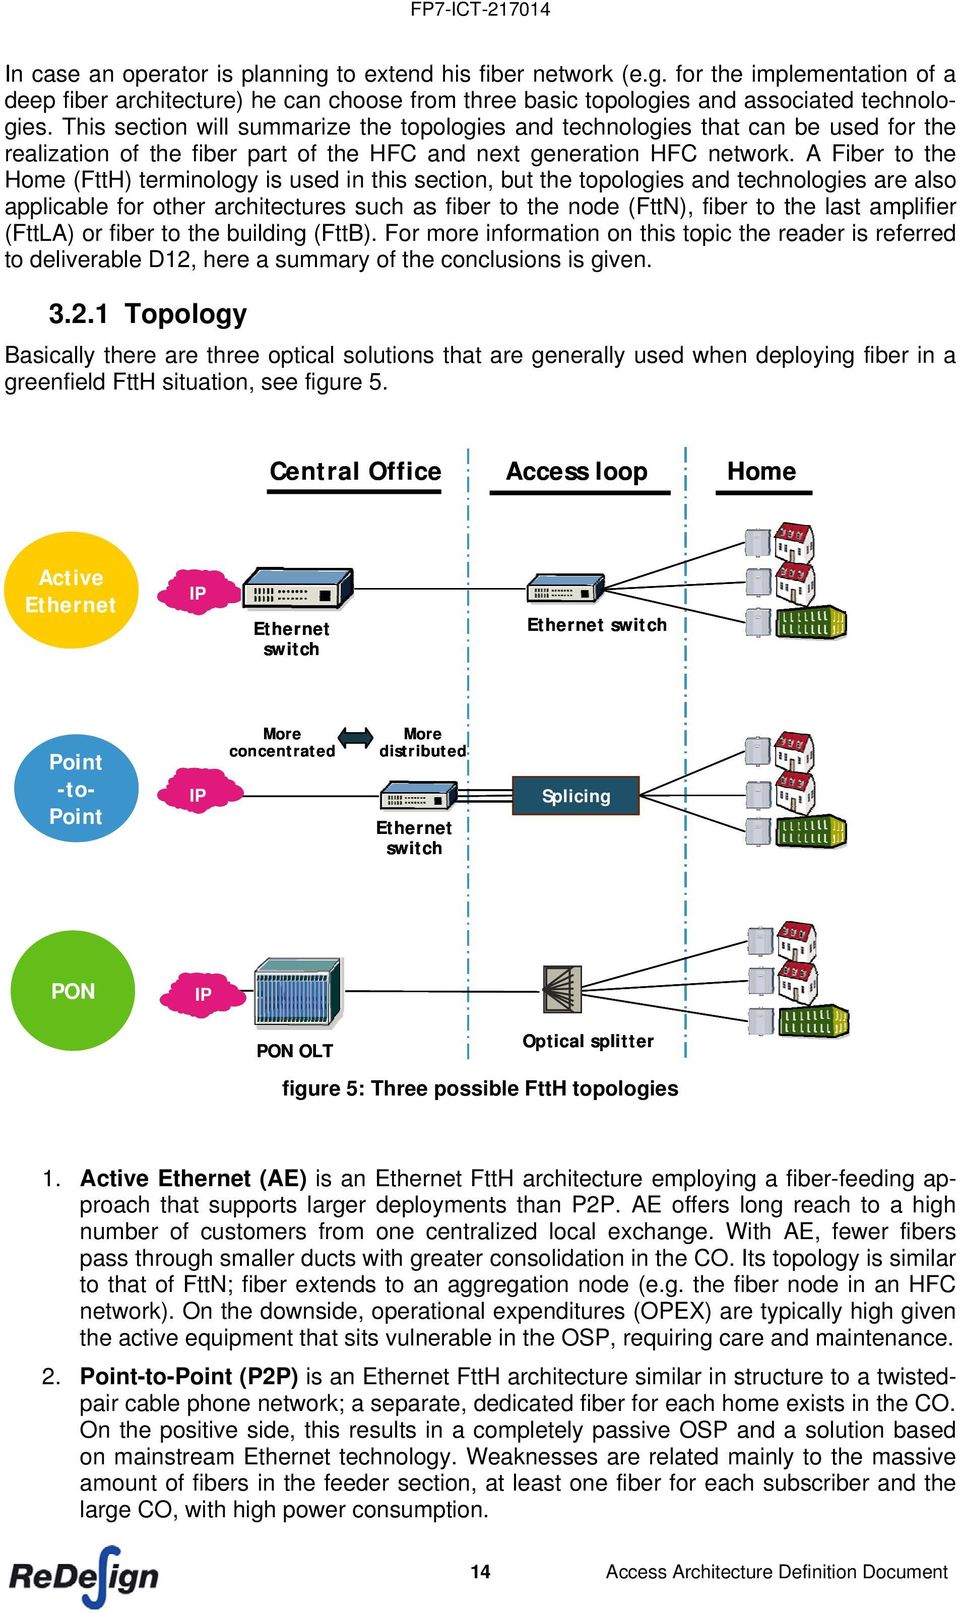 A Fiber to the Home (FttH) terminology is used in this section, but the topologies and technologies are also applicable for other architectures such as fiber to the node (FttN), fiber to the last